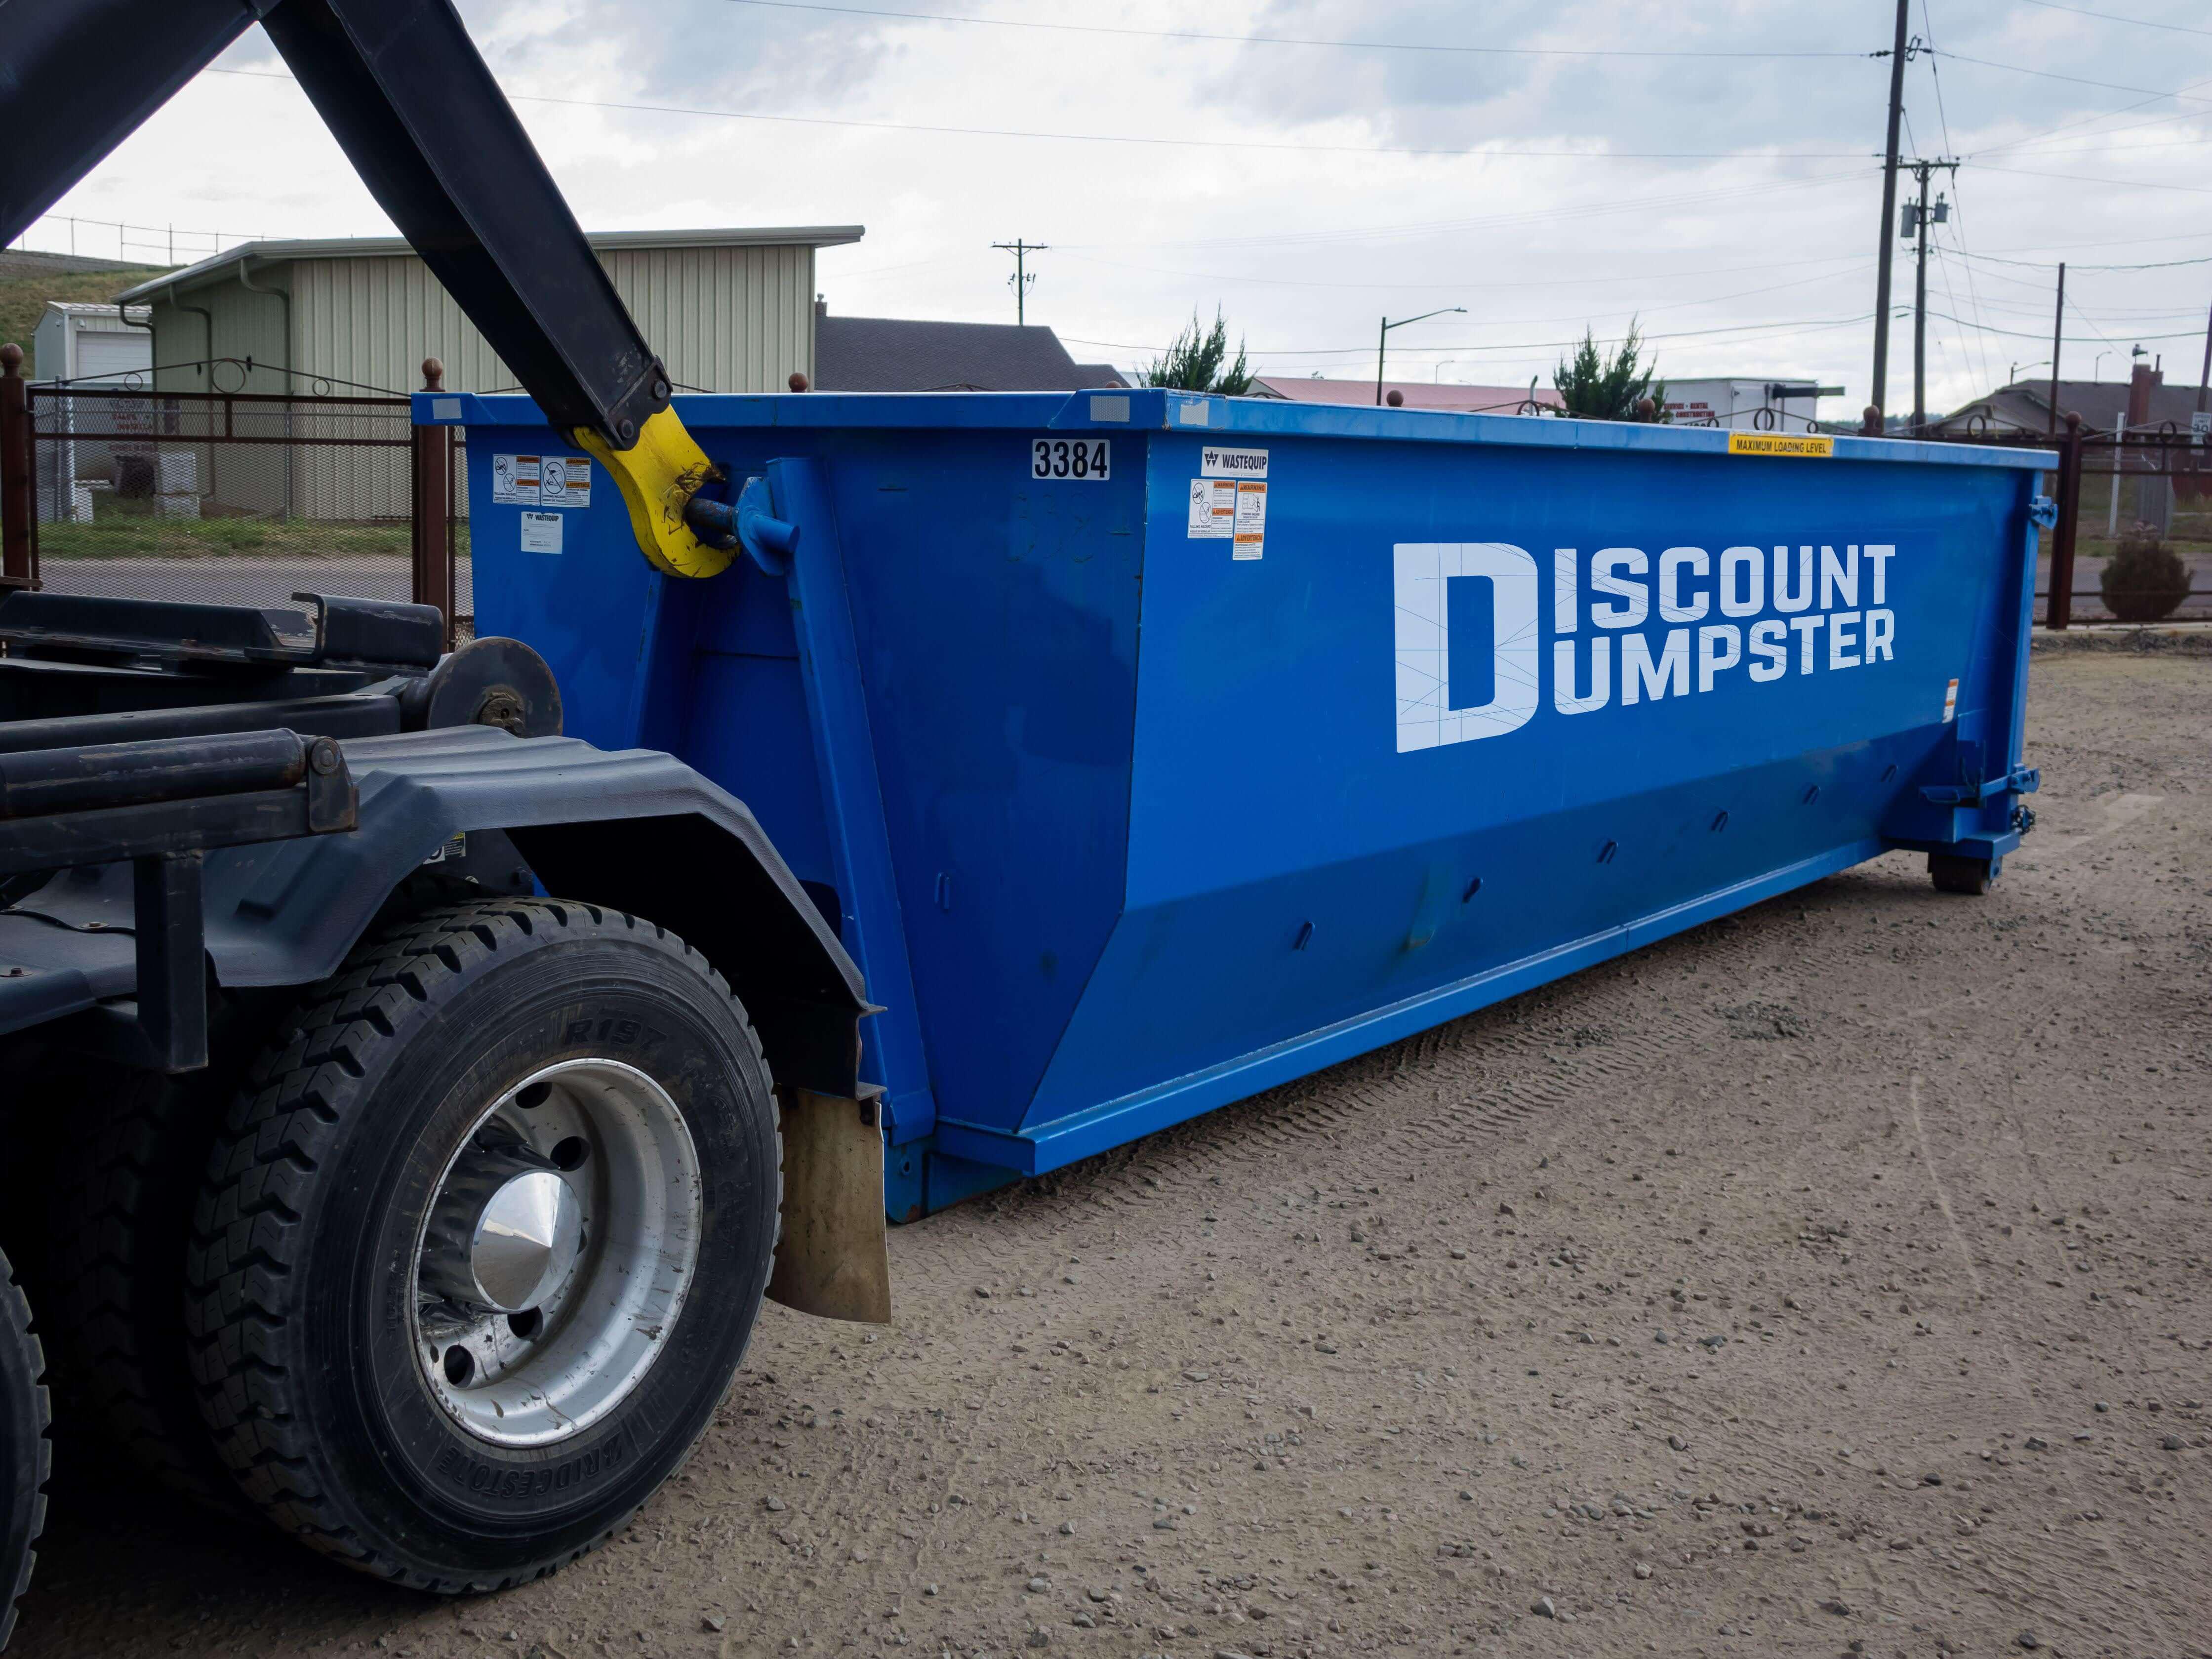 Call discount dumpster in Chicago il to learn about our quality roll off dumpsters